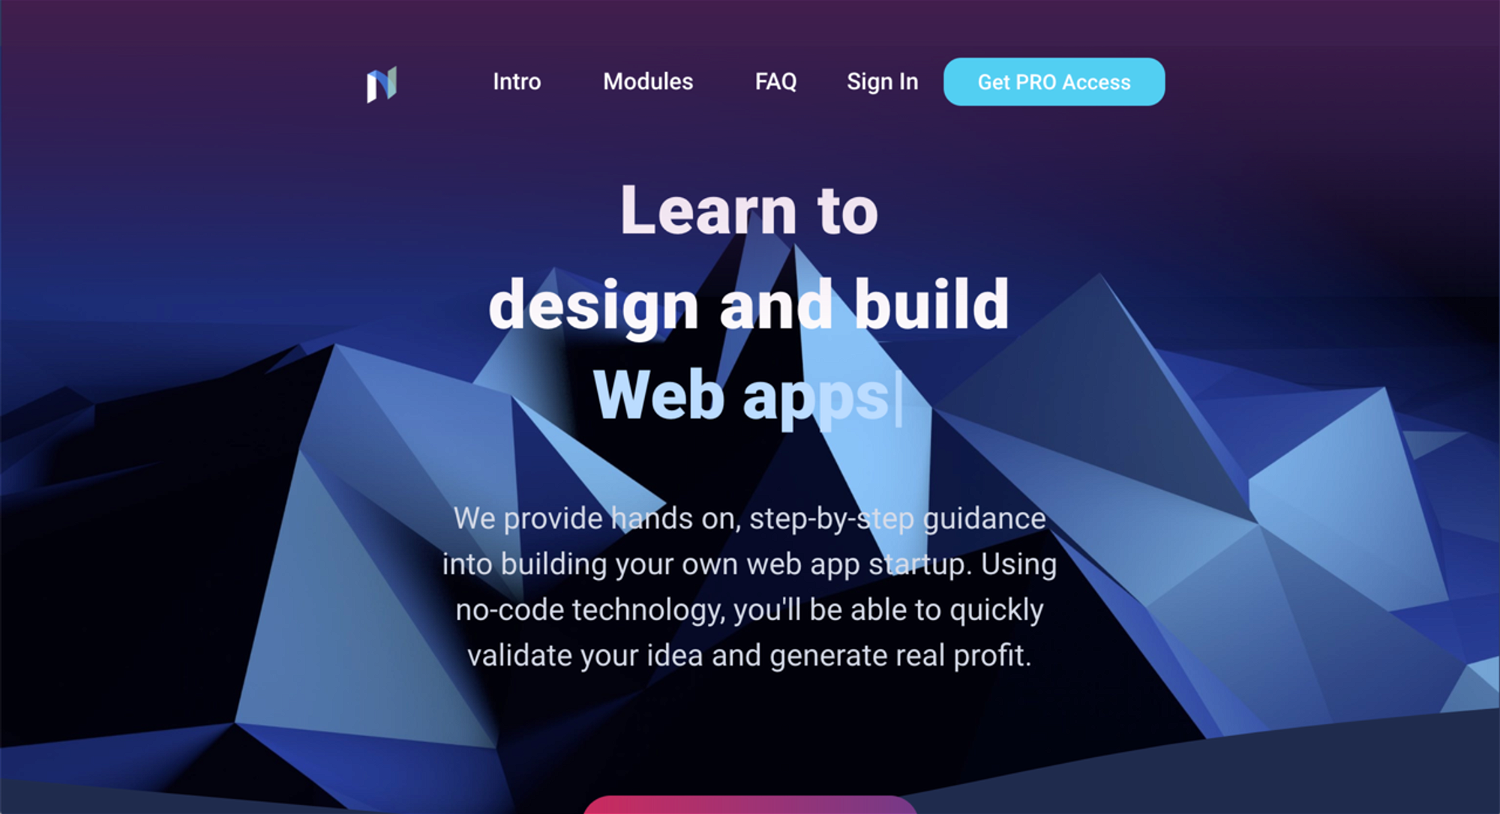 Nocodify | Learn to design and build web apps using no code